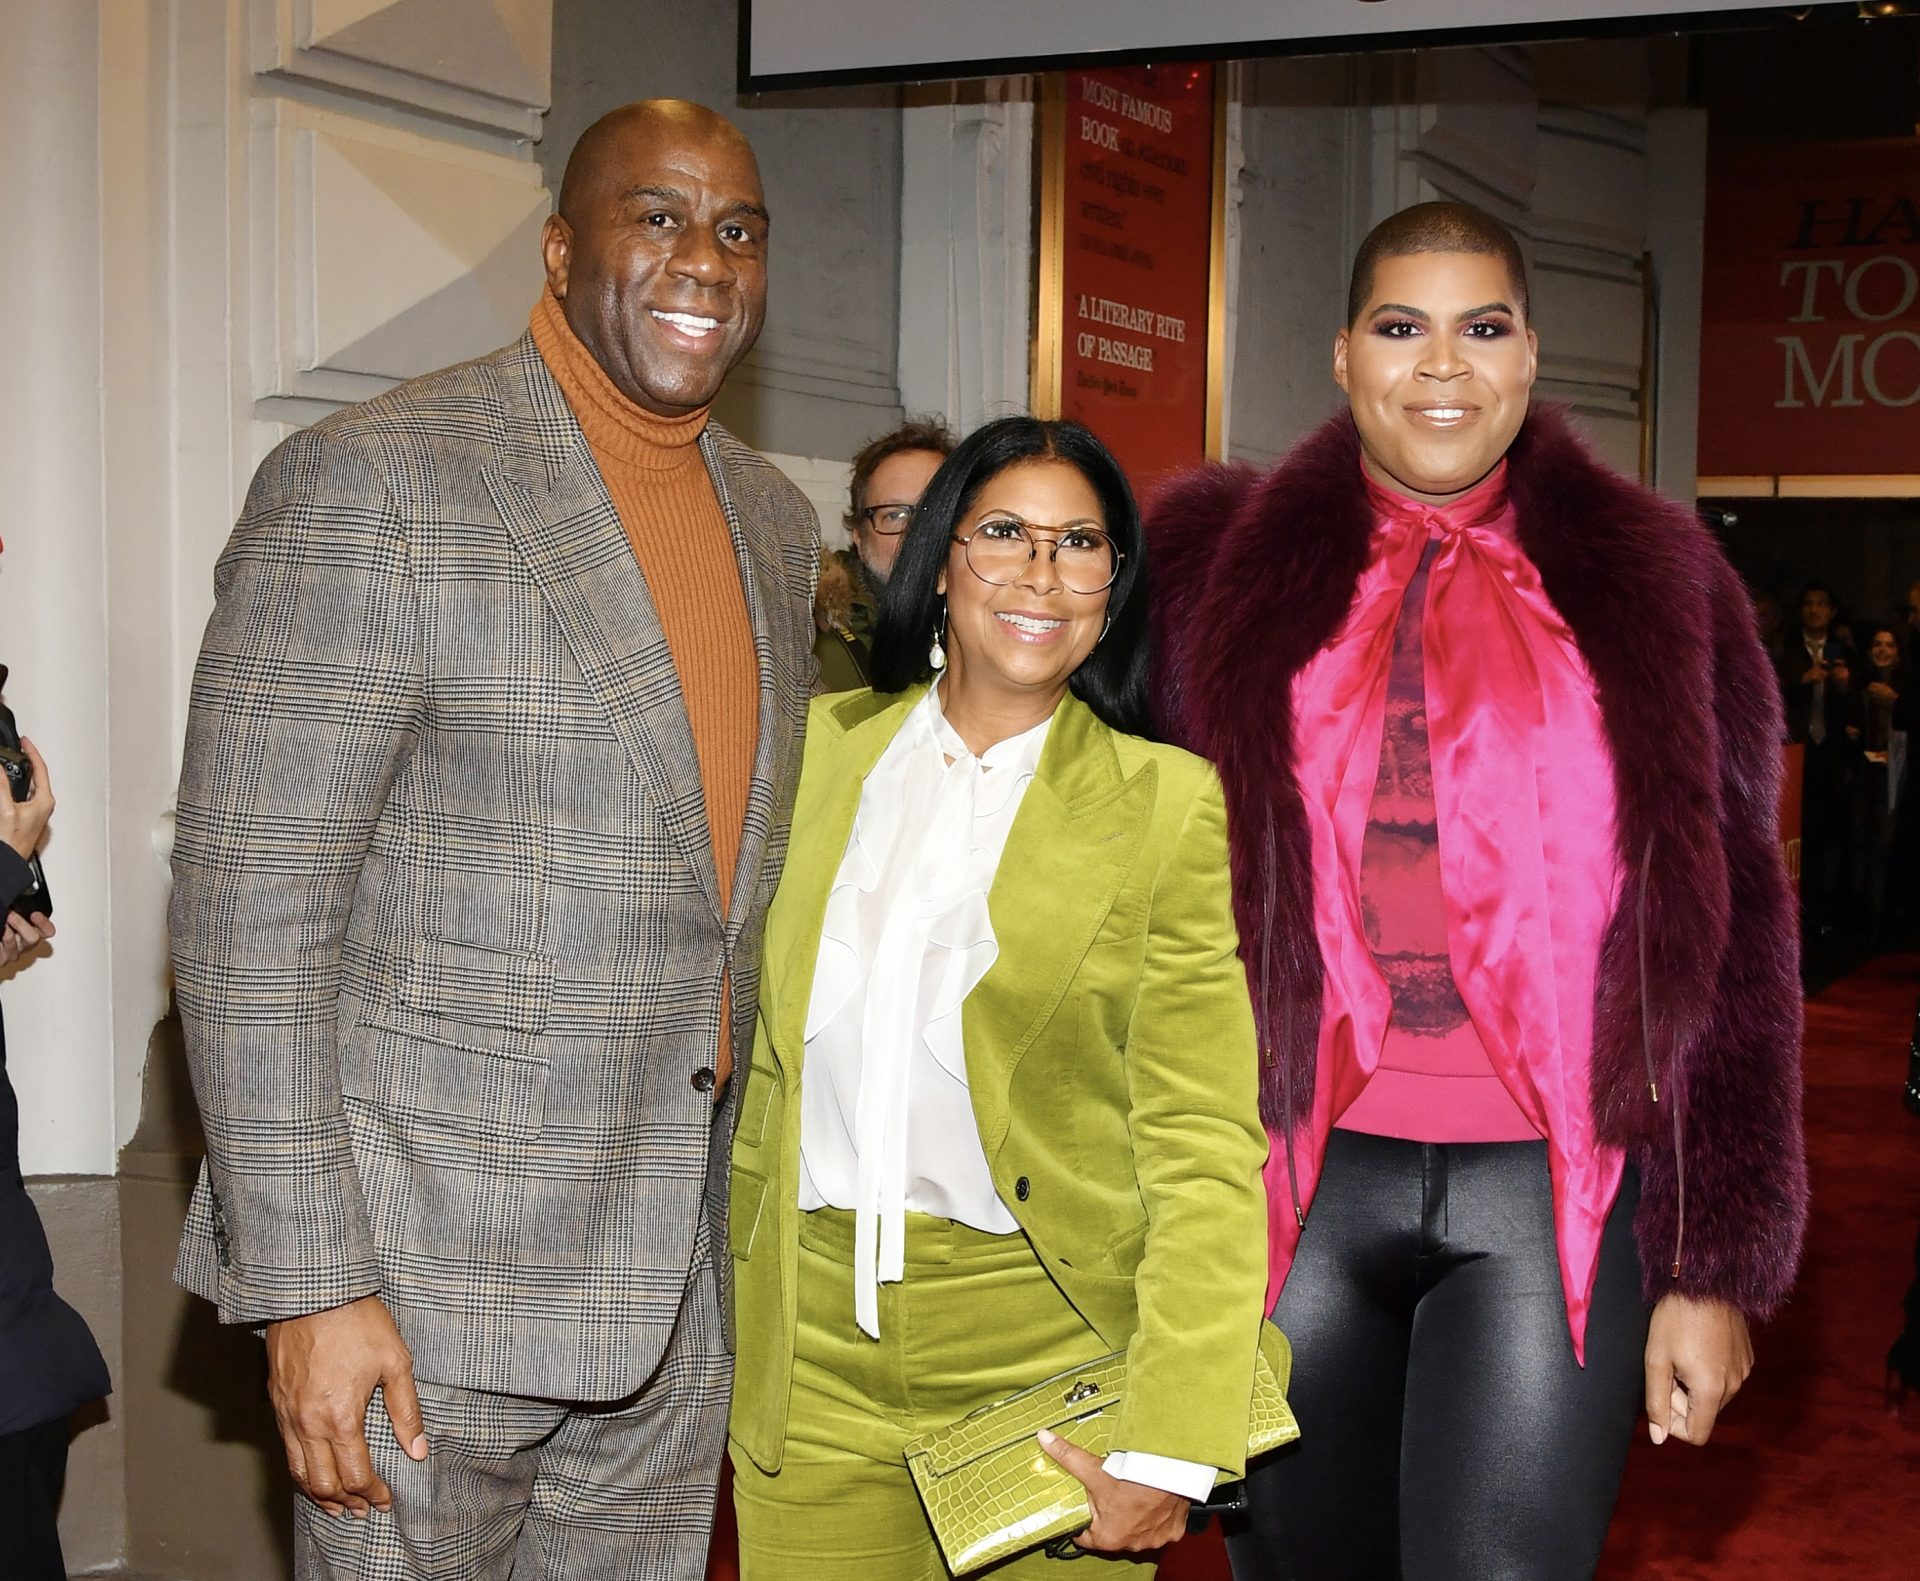 Magic Johnson says his son EJ's coming out 'changed' him